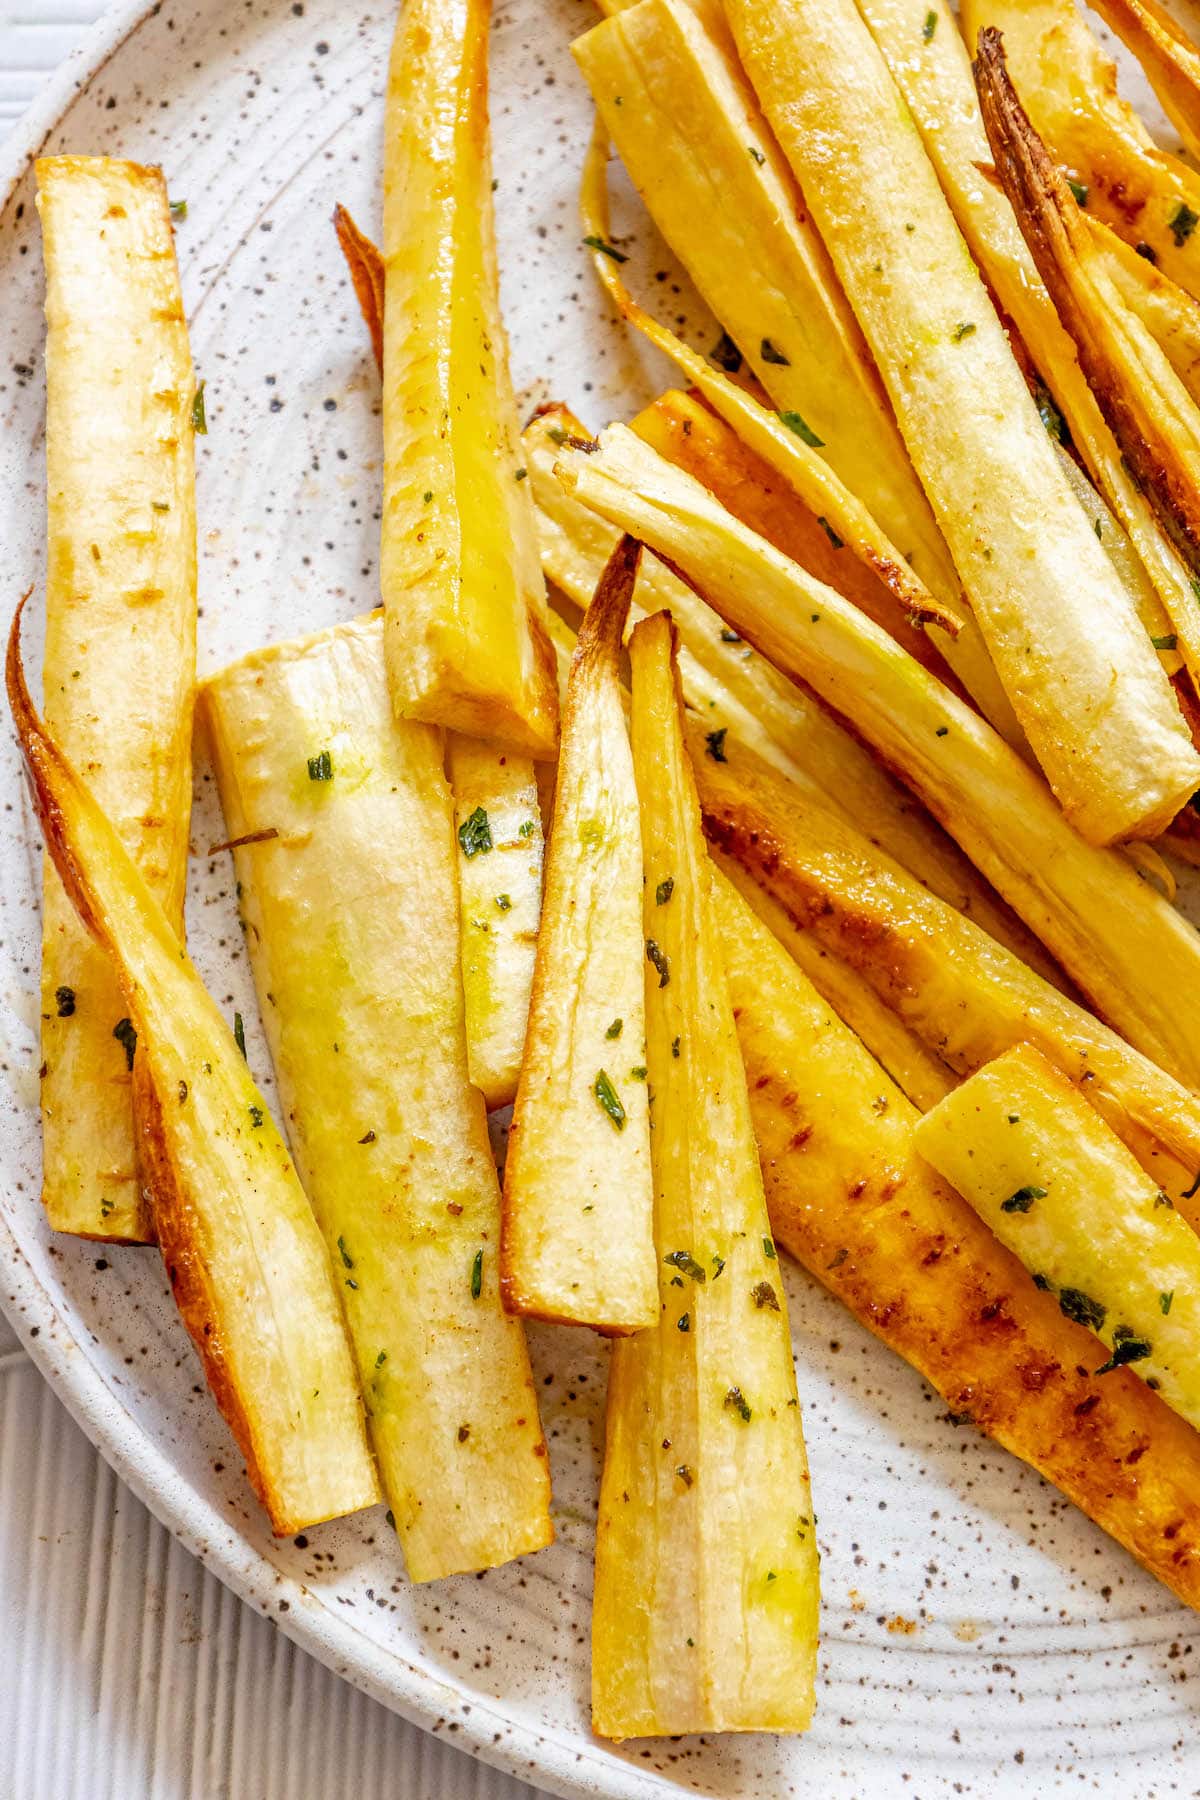 roasted parsnips seasoned with garlic butter and herbs with salt and pepper